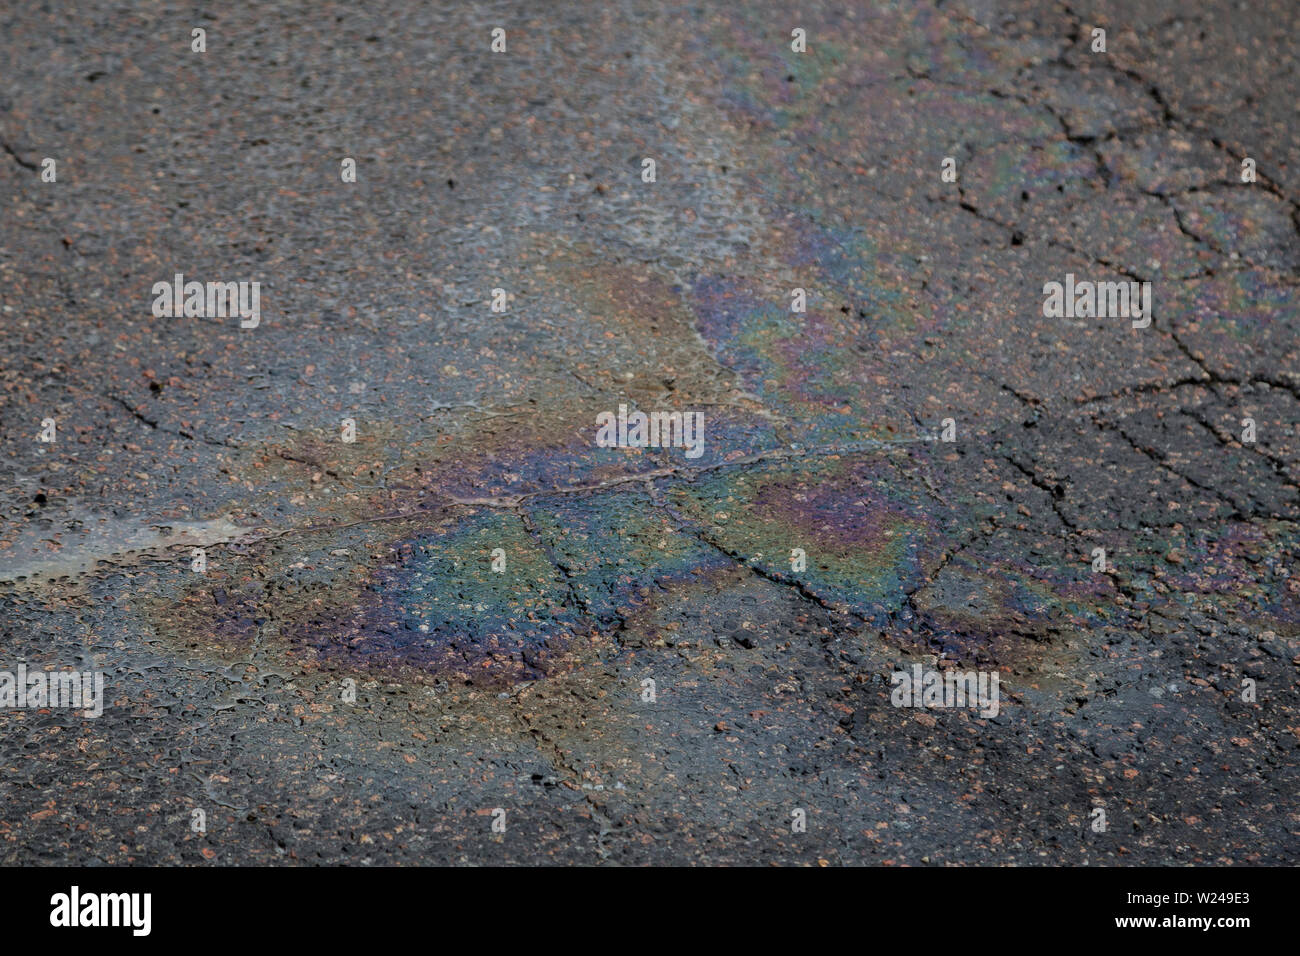 Close-up of an iridescent oil or gasoline spill on a wet asphalt. Tilted angle, focused on the foreground. Stock Photo